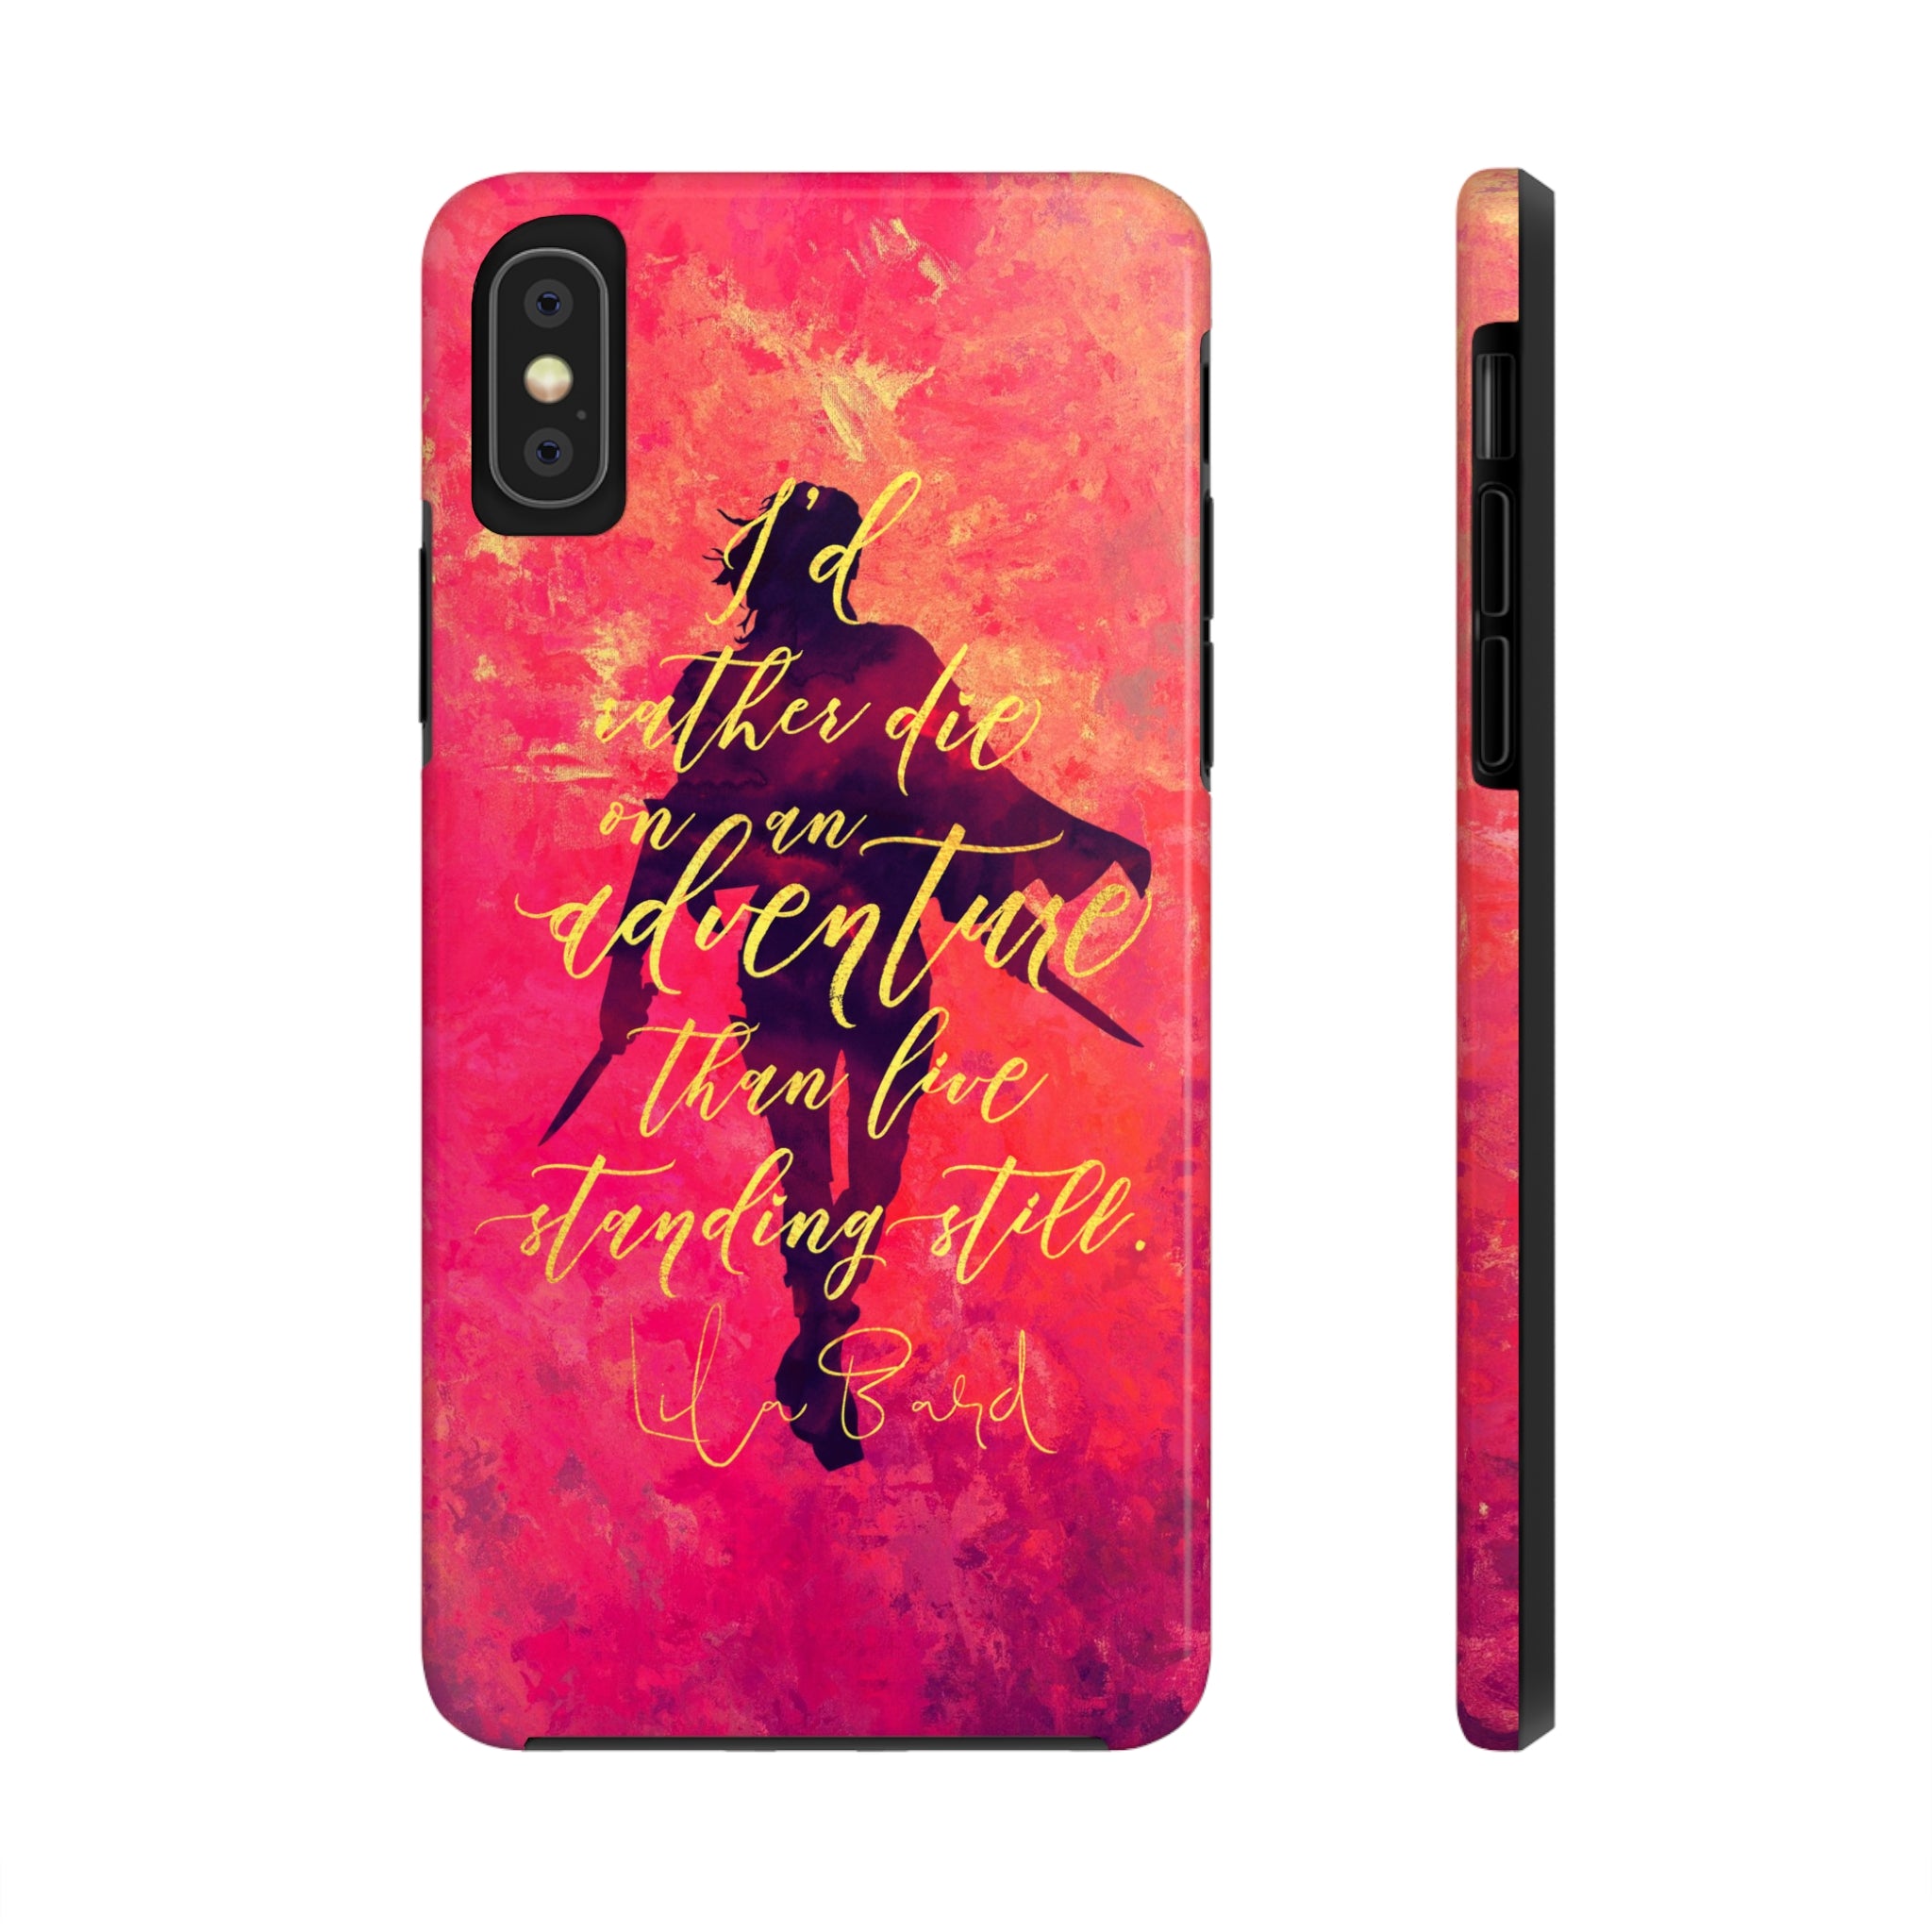 I'd rather die on an adventure... Lila Bard. ADSOM Tough iPhone Case